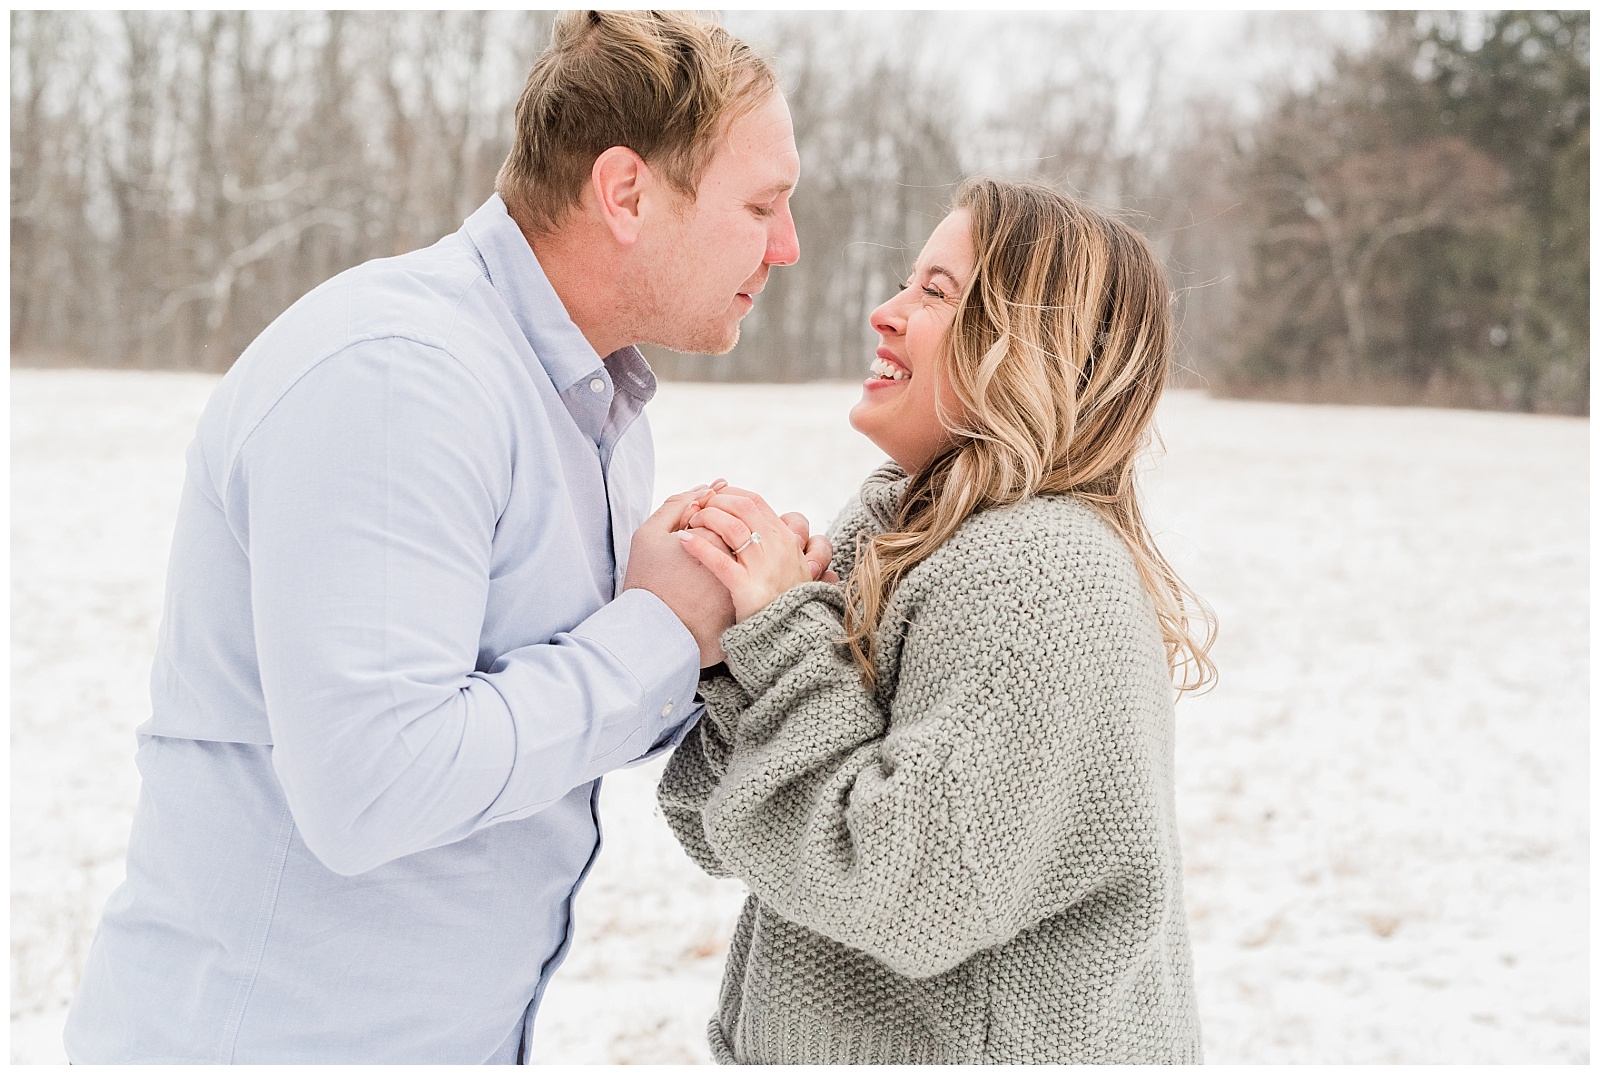 New Jersey Engagement Session, Snowy, Winter, Cozy, Session, Wedding Photographer, Cross Estate Gardens, Snow, Wintry, Light and Airy, Joy